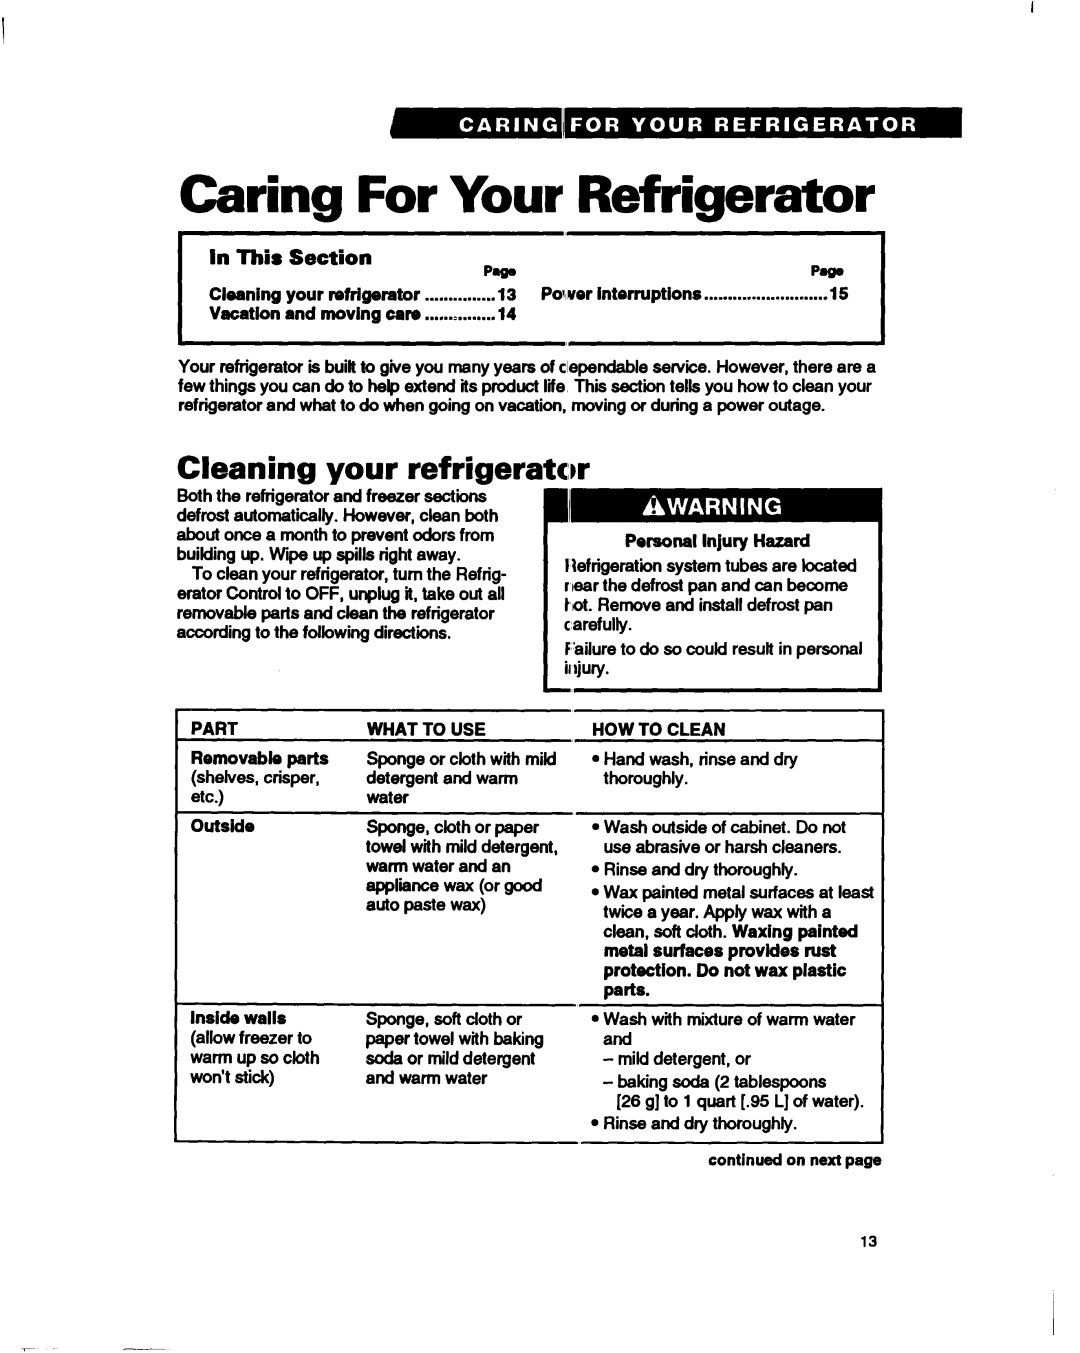 Whirlpool RT14HK, RTl4GD Caring For Your Refrigerator, In This Section PWPWP, Cleaning your refrigerator 